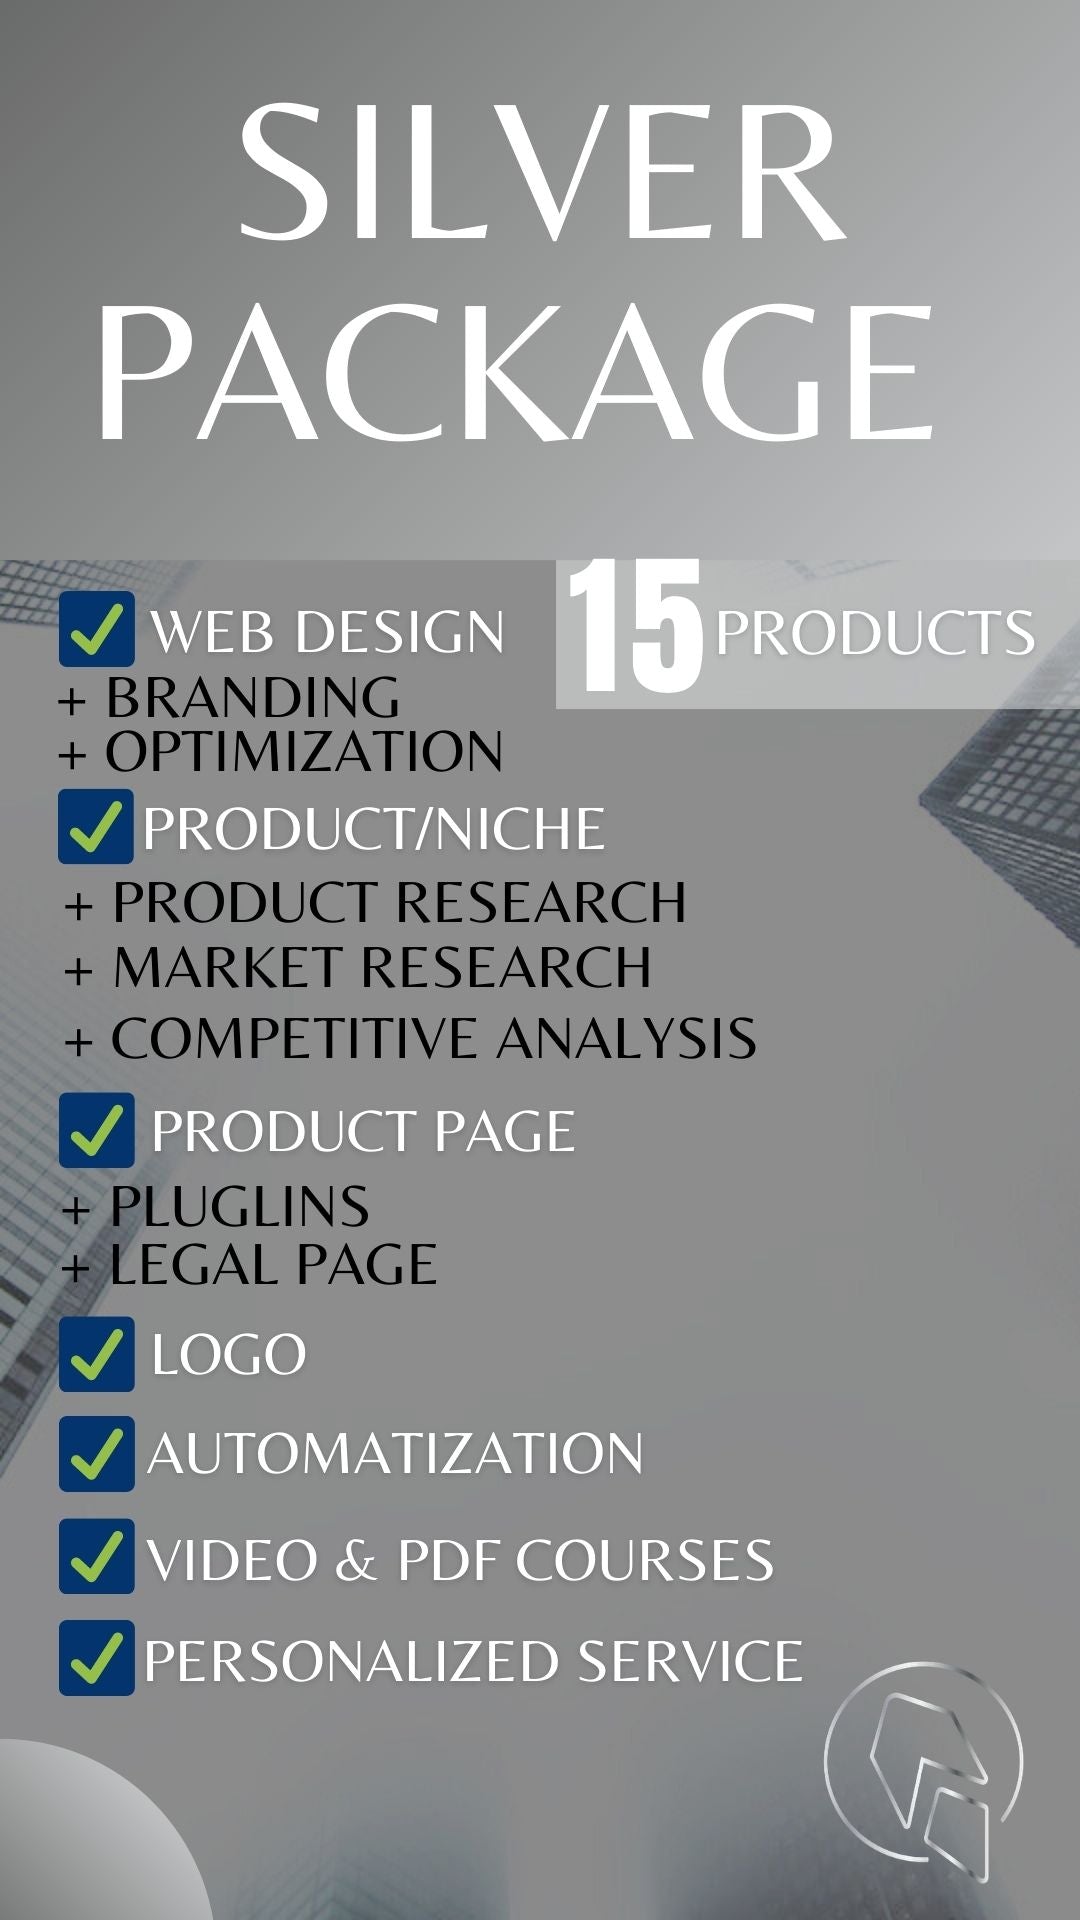 SILVER WEBSITE SERVICE PACKAGE